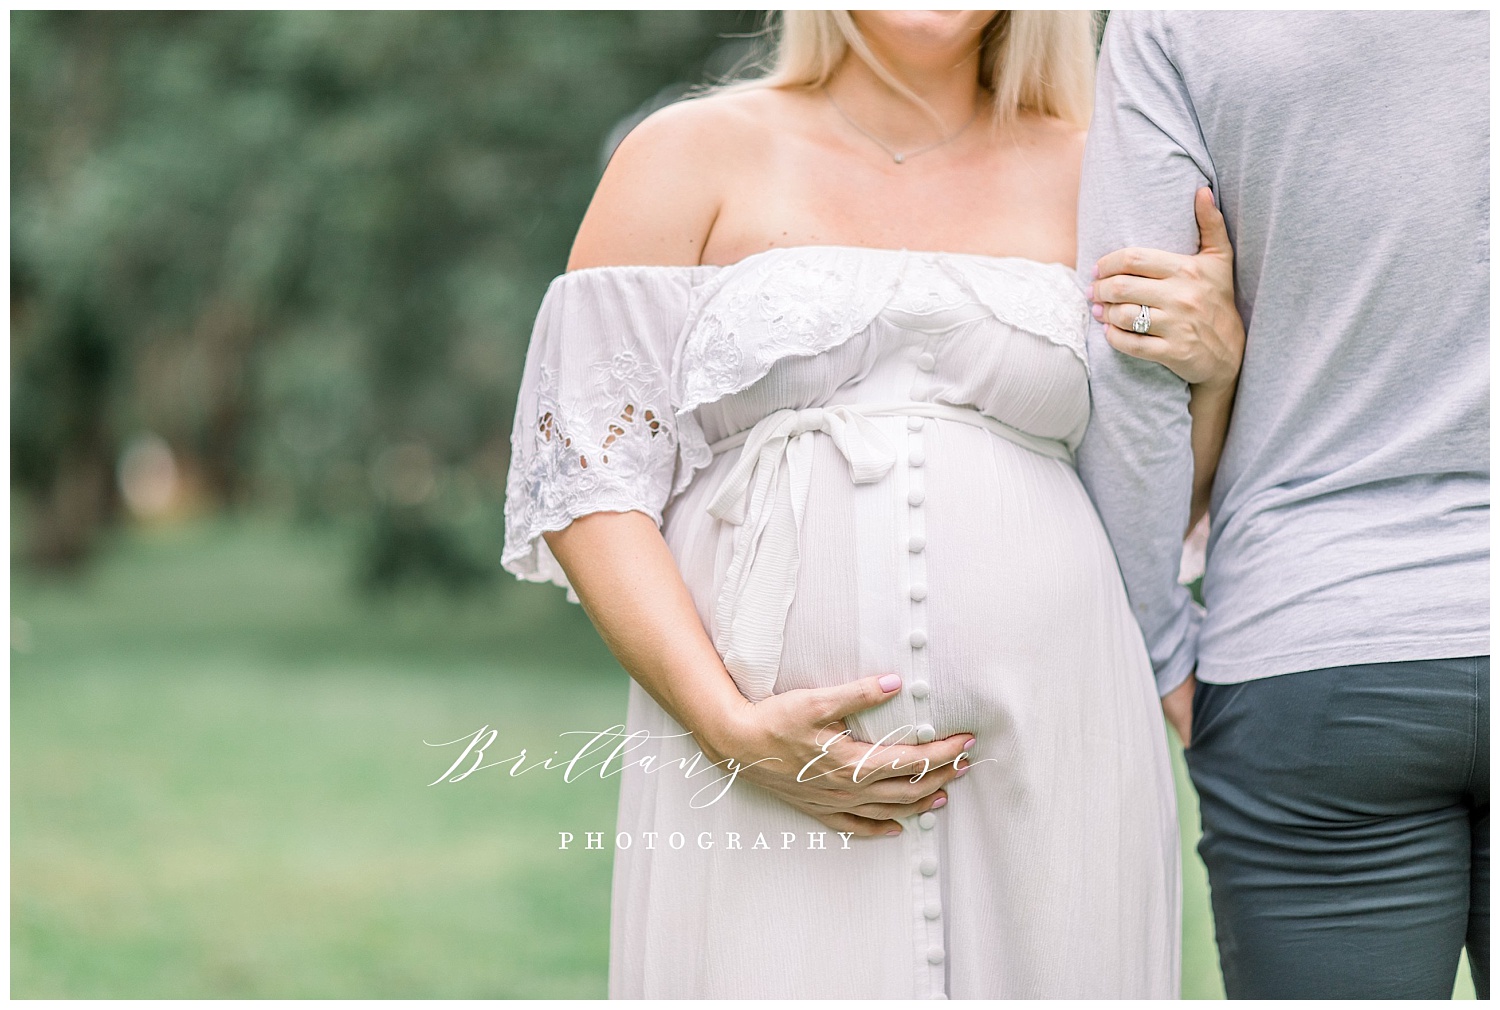 Tampa Outdoor Maternity Photographer